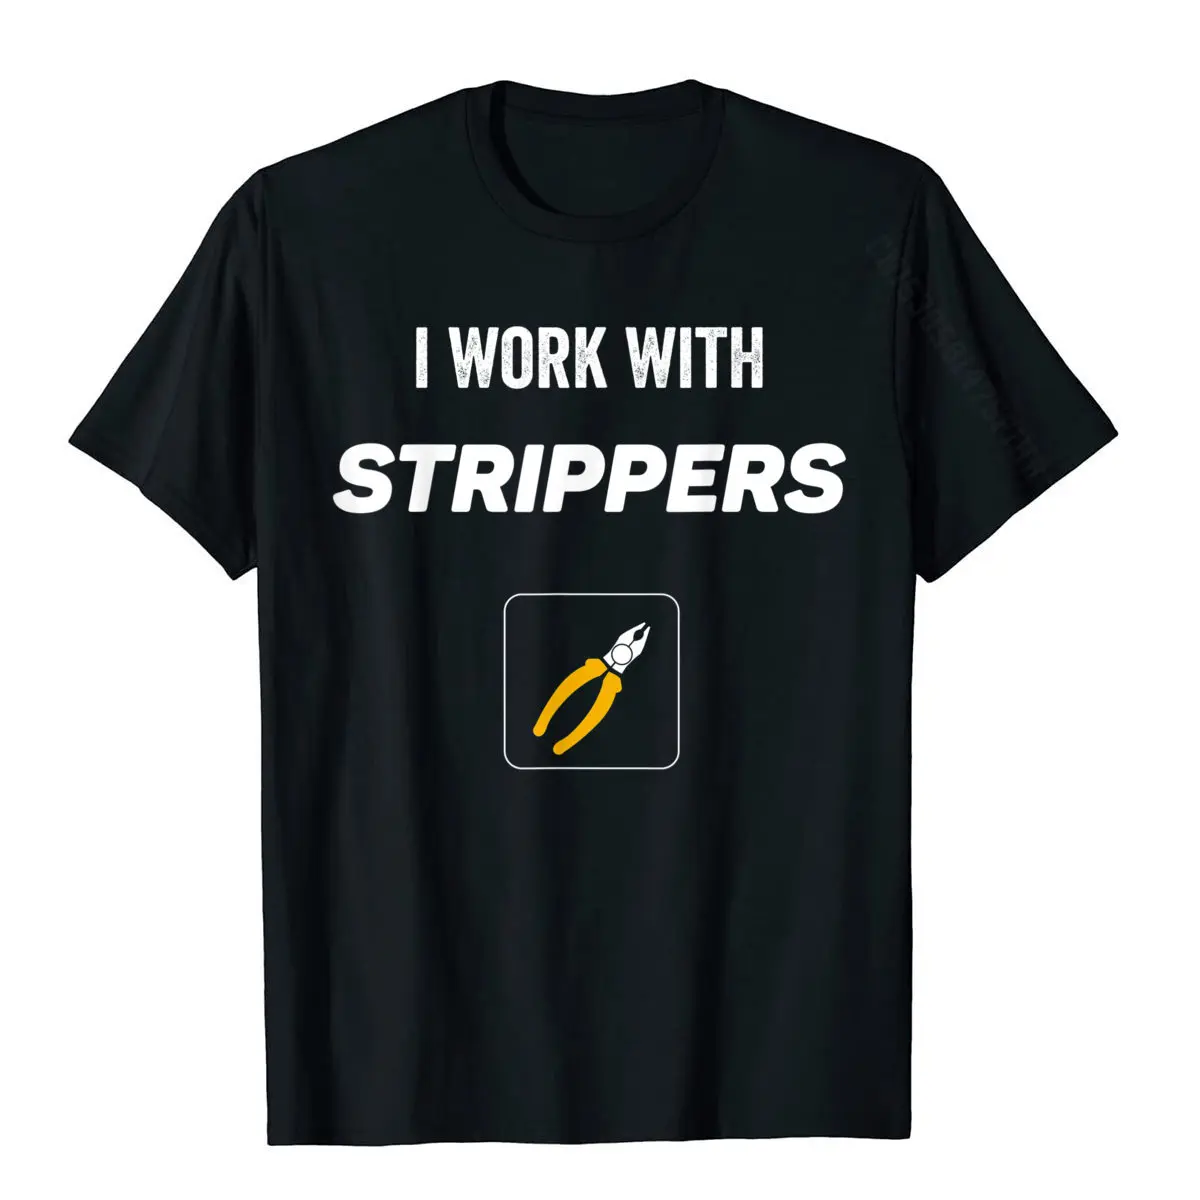 Electrician I Work With Strippers Funny Gift For Lineman T-Shirt T Shirt Cotton Men's Top T-Shirts Funny